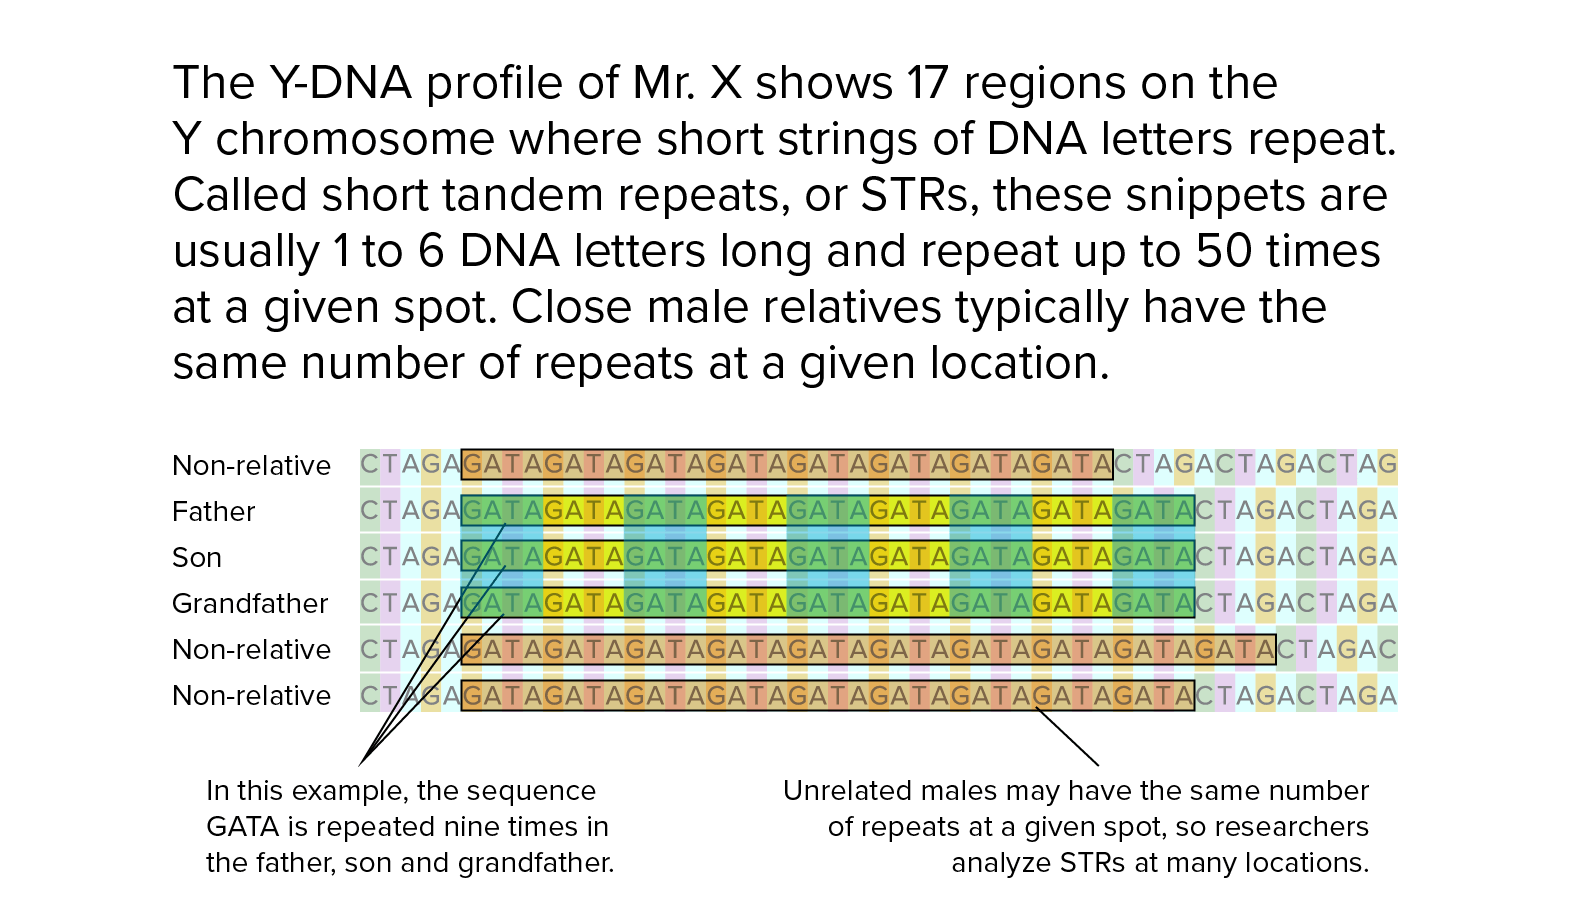 The Y-DNA profile of Mr. X shows 17 regions on the Y chromosome where short strings of DNA letters repeat. Called short tandem repeats, or STRs, these snippets are usually 1 to 6 DNA letters long and repeat up to 50 times at a given spot. Close male relatives typically have the same number of repeats at a given location.